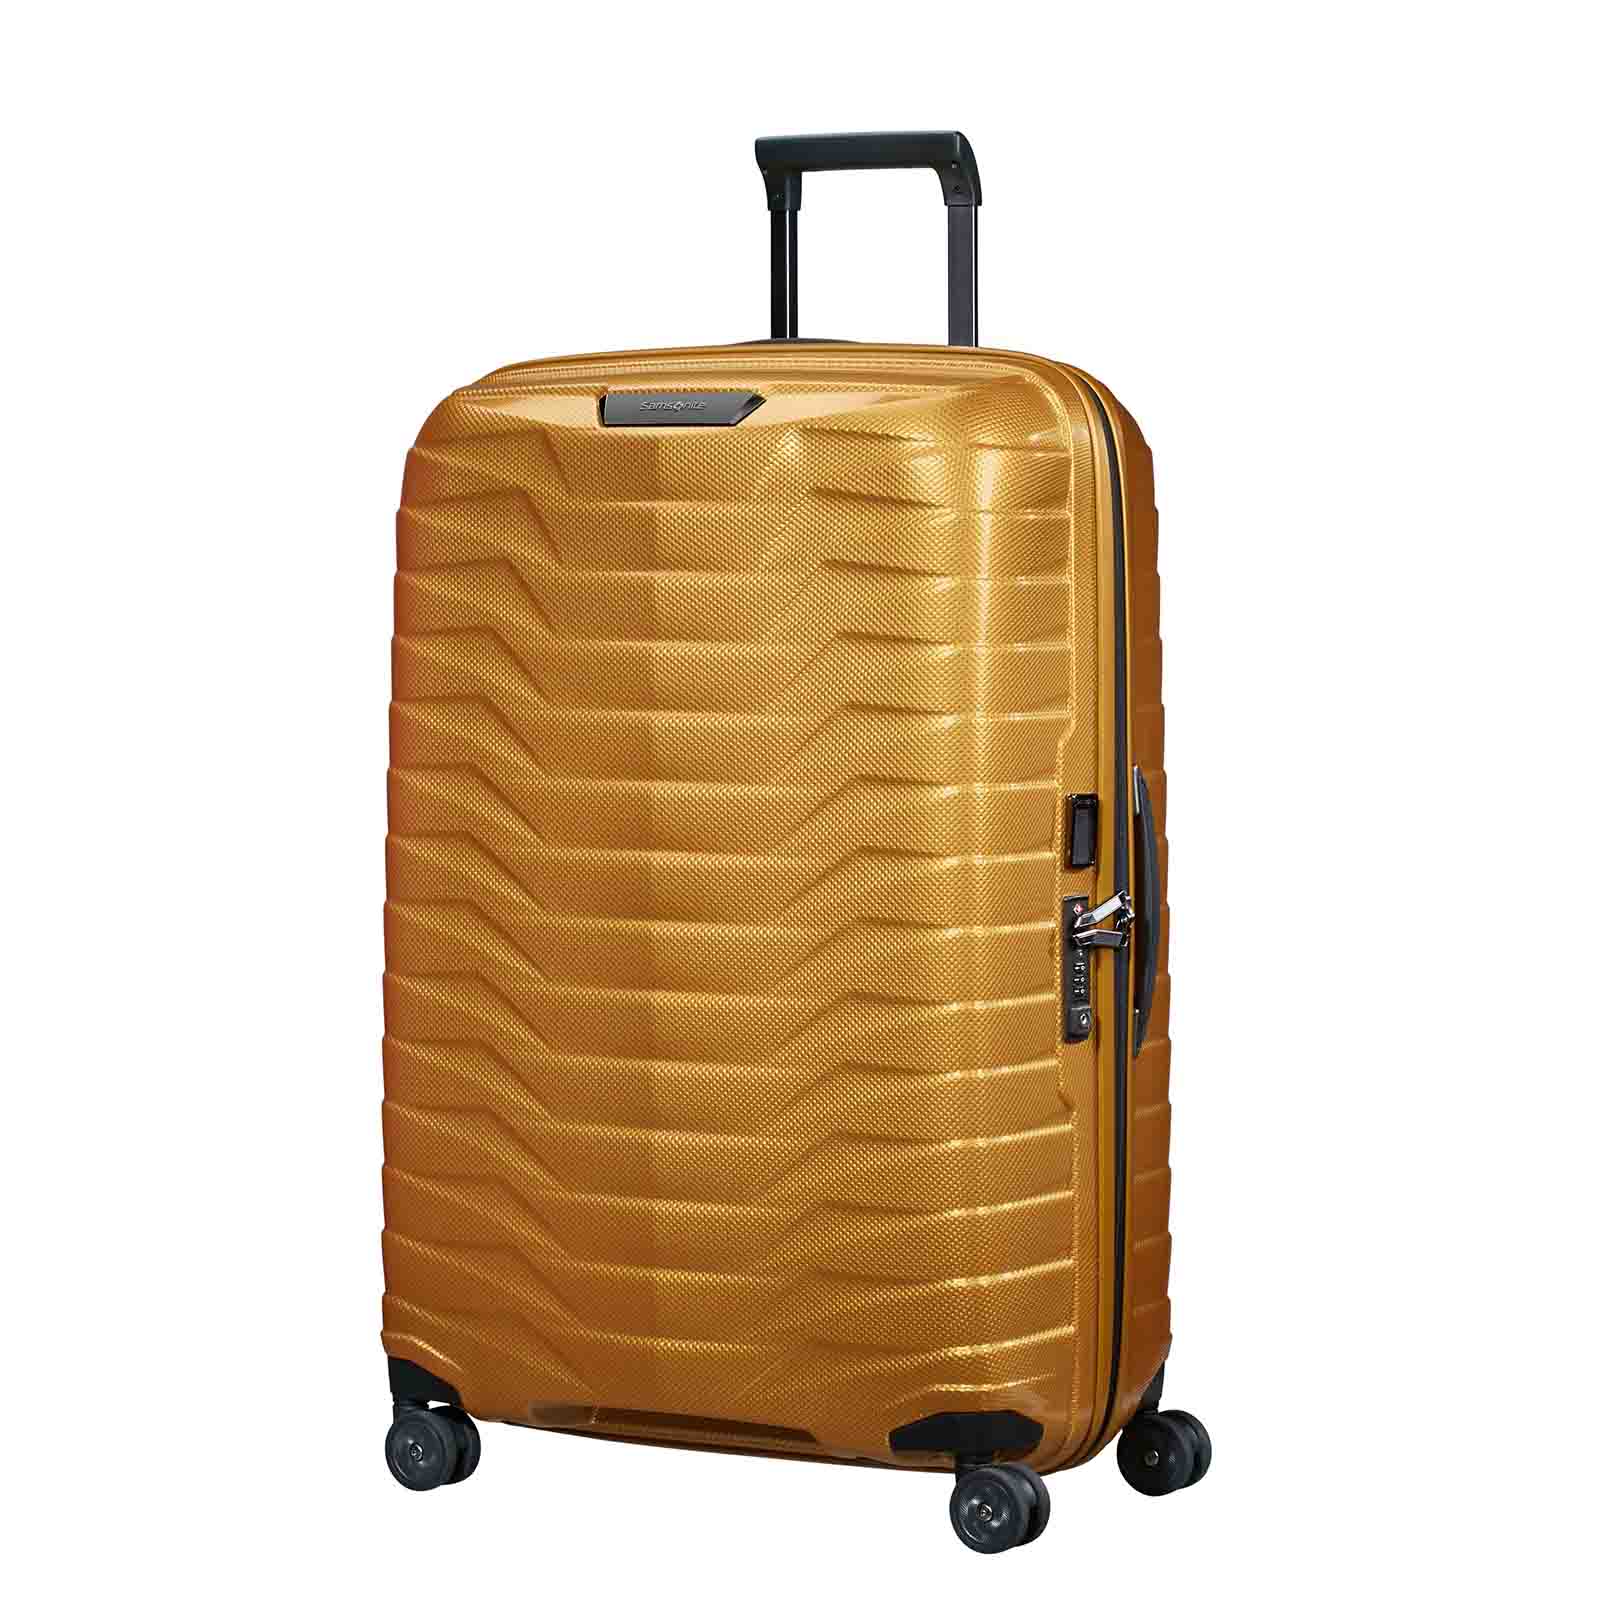 Samsonite-Proxis-75cm-Suitcase-Honey-Gold-Front-Angle